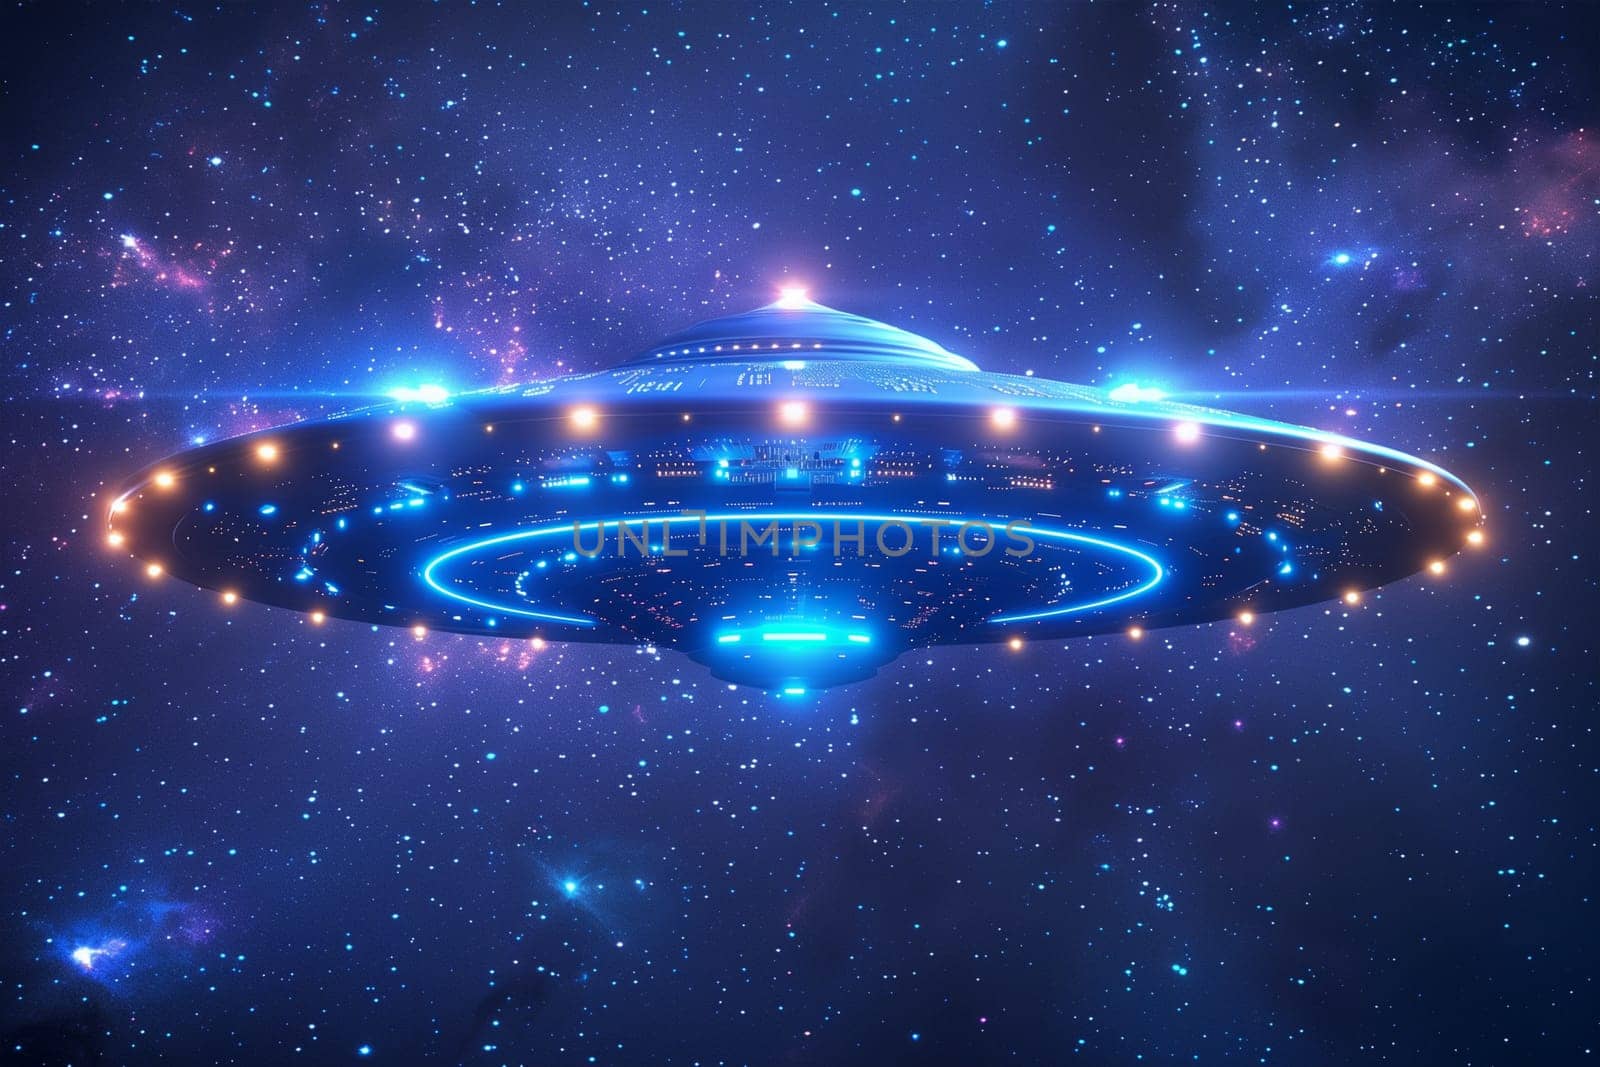 A futuristic UFO hovers above a blue surface, illuminated by bright red and blue lights.